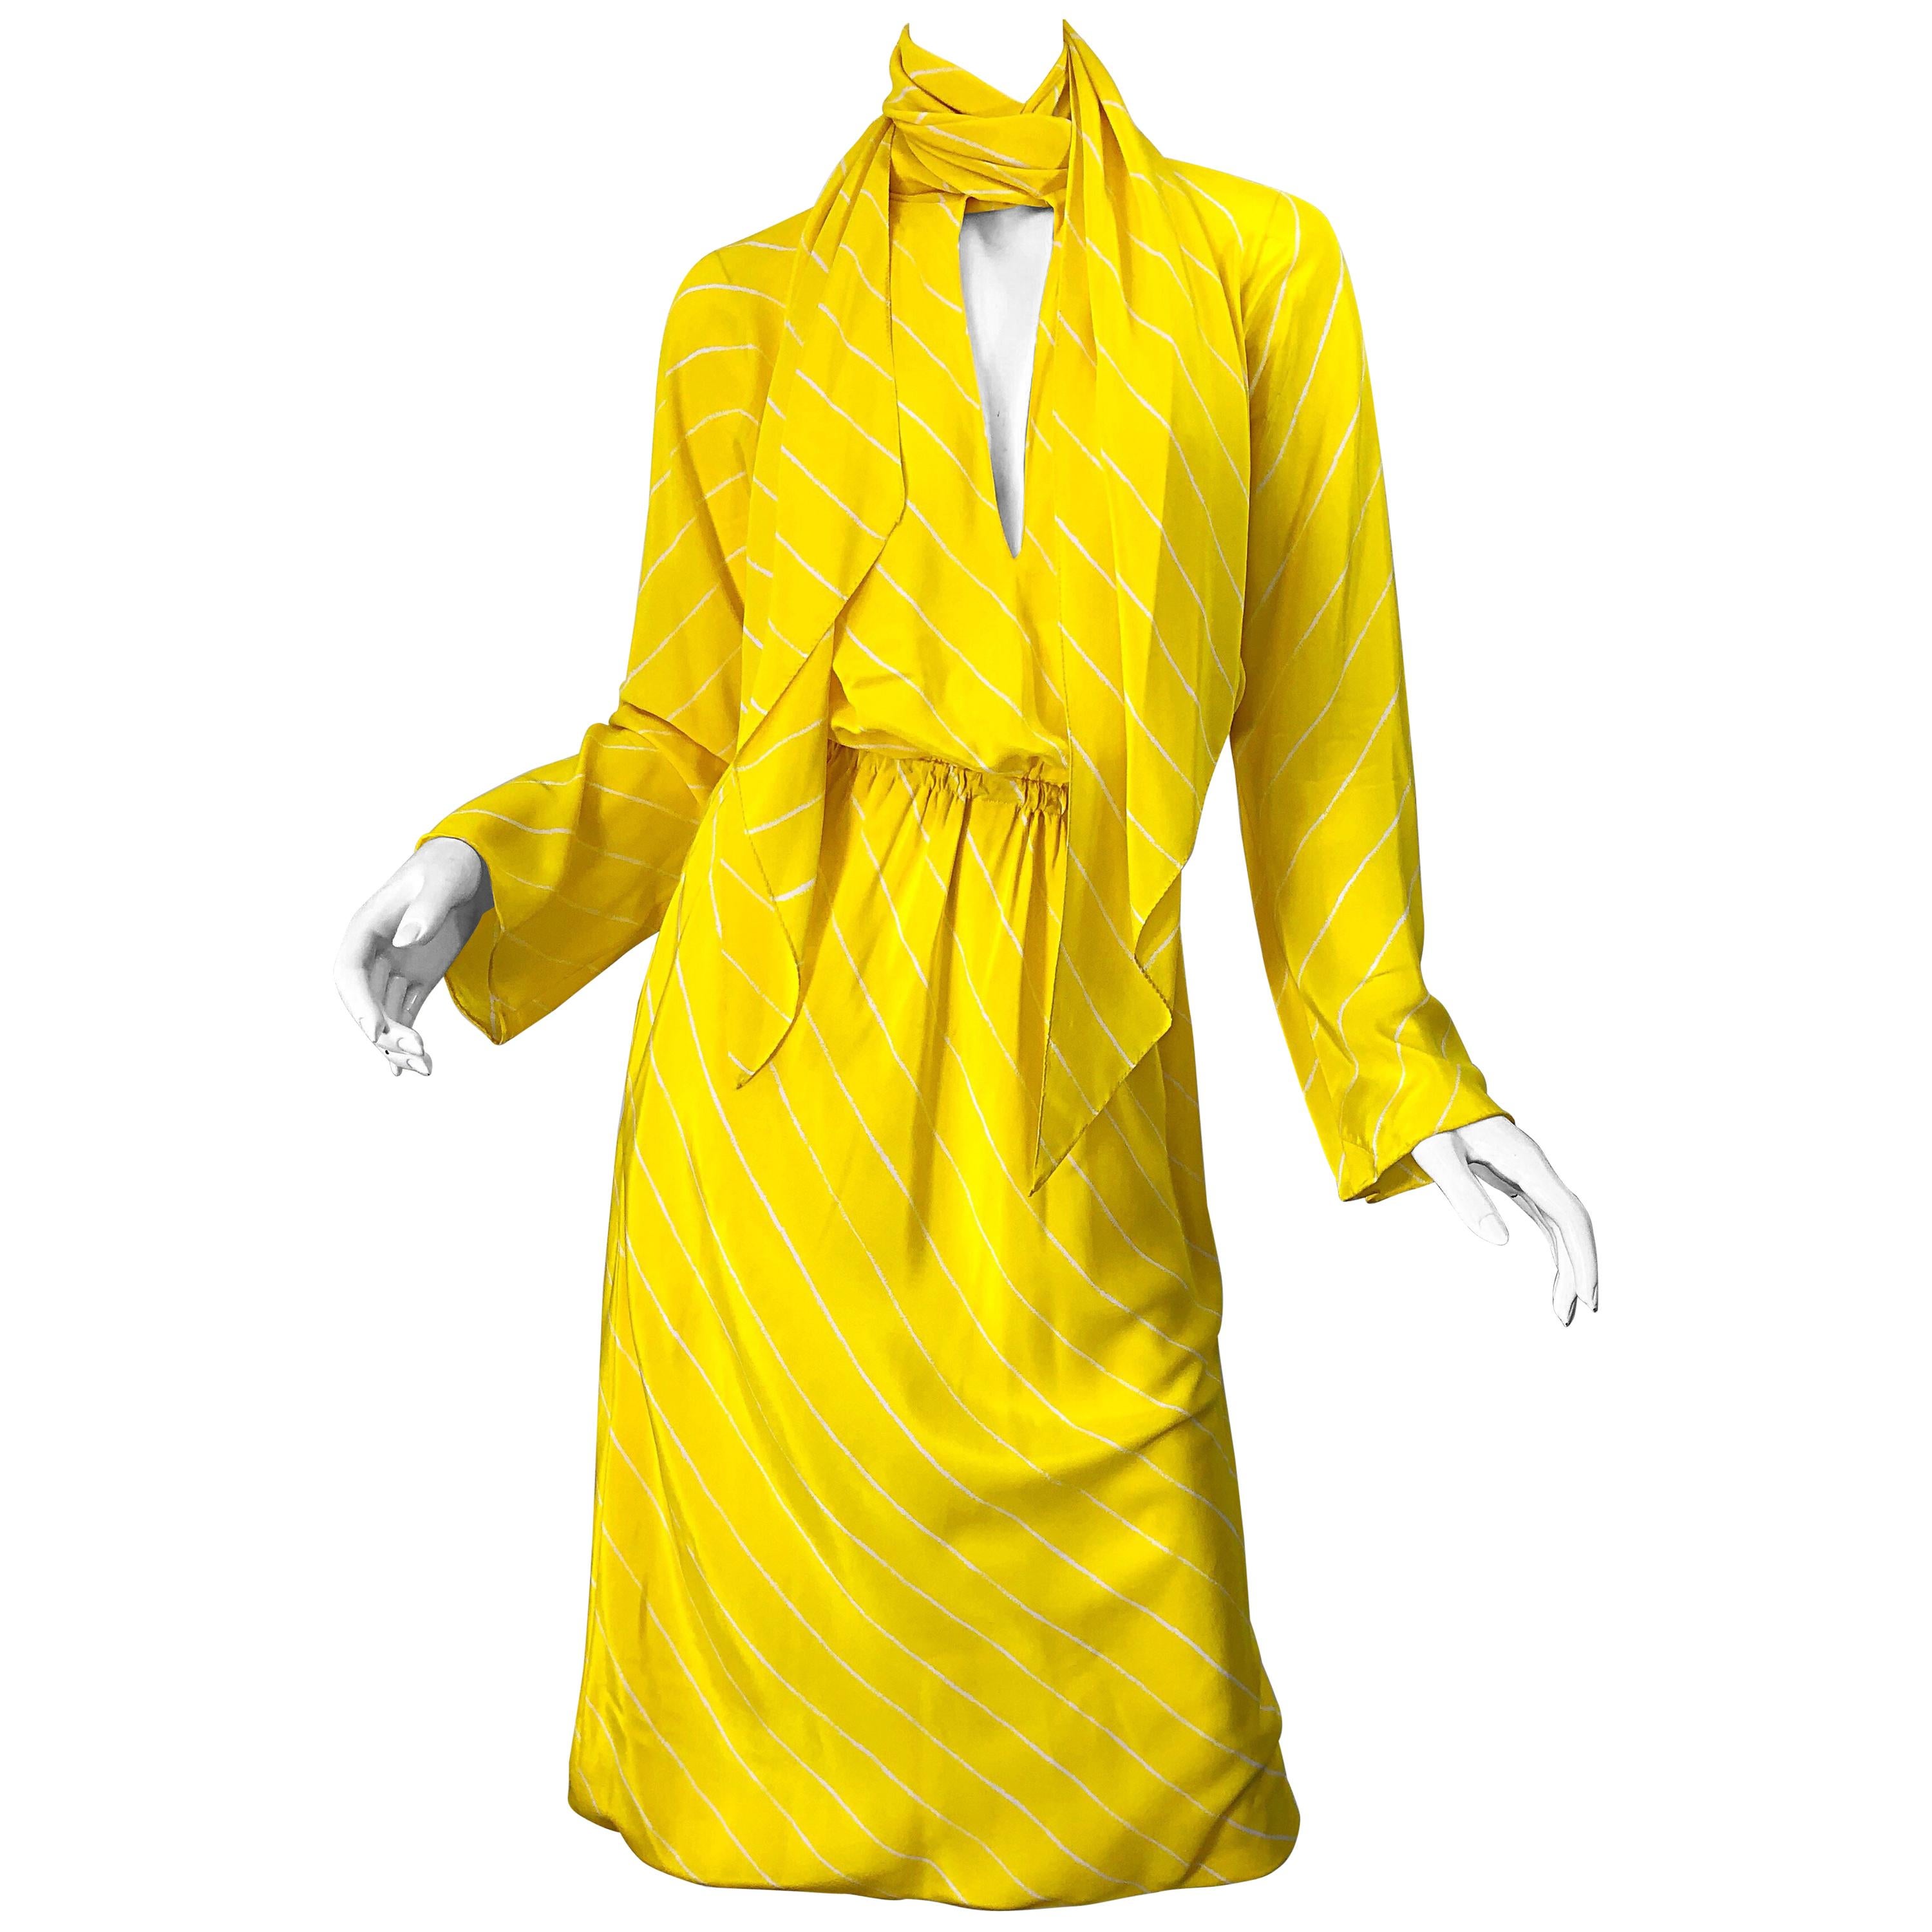 1970s Halston Canary Yellow + White Chevron Striped Bell Sleeve 70s Scarf Dress